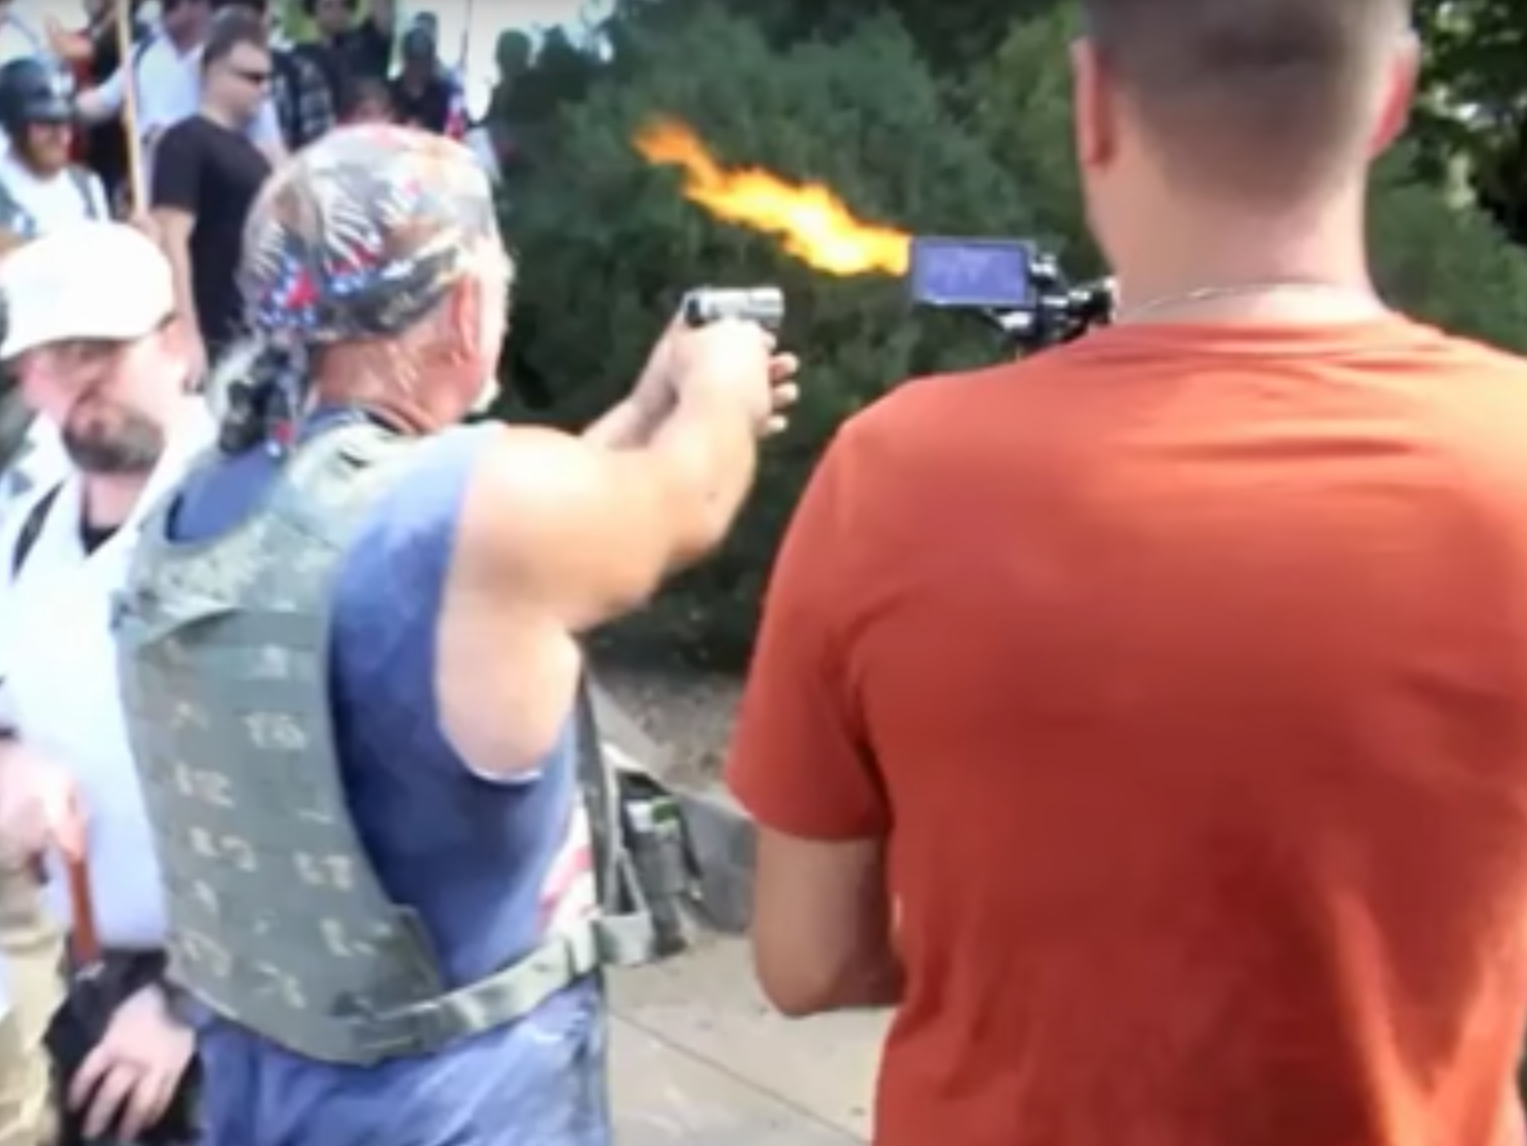 A man identified by police as Richard Wilson Preston points his gun at counter-protestors at a white supremacist rally in Virginia